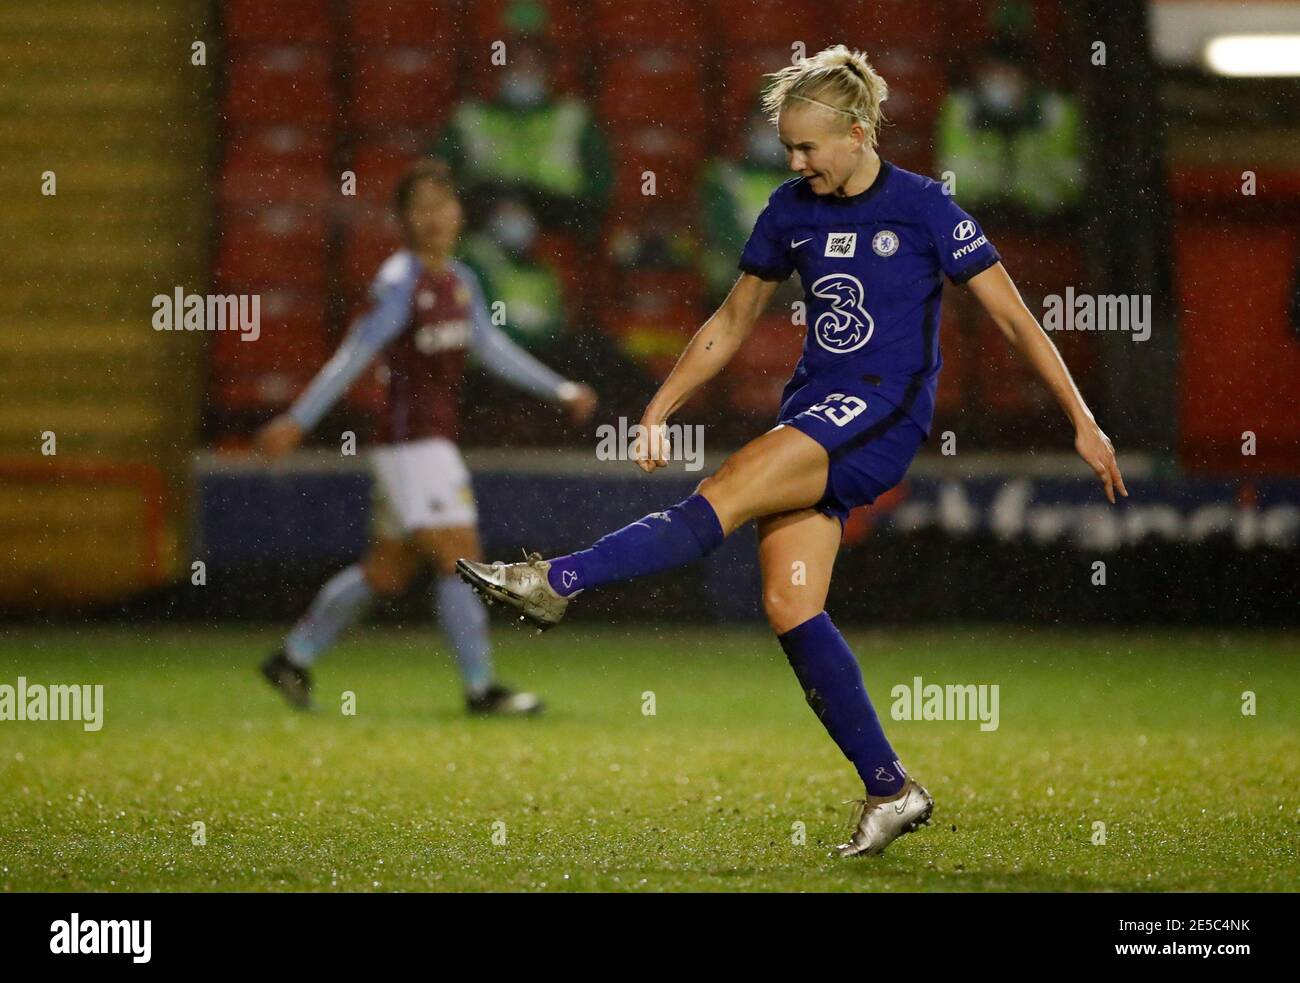 Soccer Football - Women's Super League -  Aston Villa v Chelsea - Banks Stadium, Walsall, Britain - January 27, 2021 Chelsea's Pernille Harder scores their third goal Action Images via Reuters/Andrew Couldridge Stock Photo